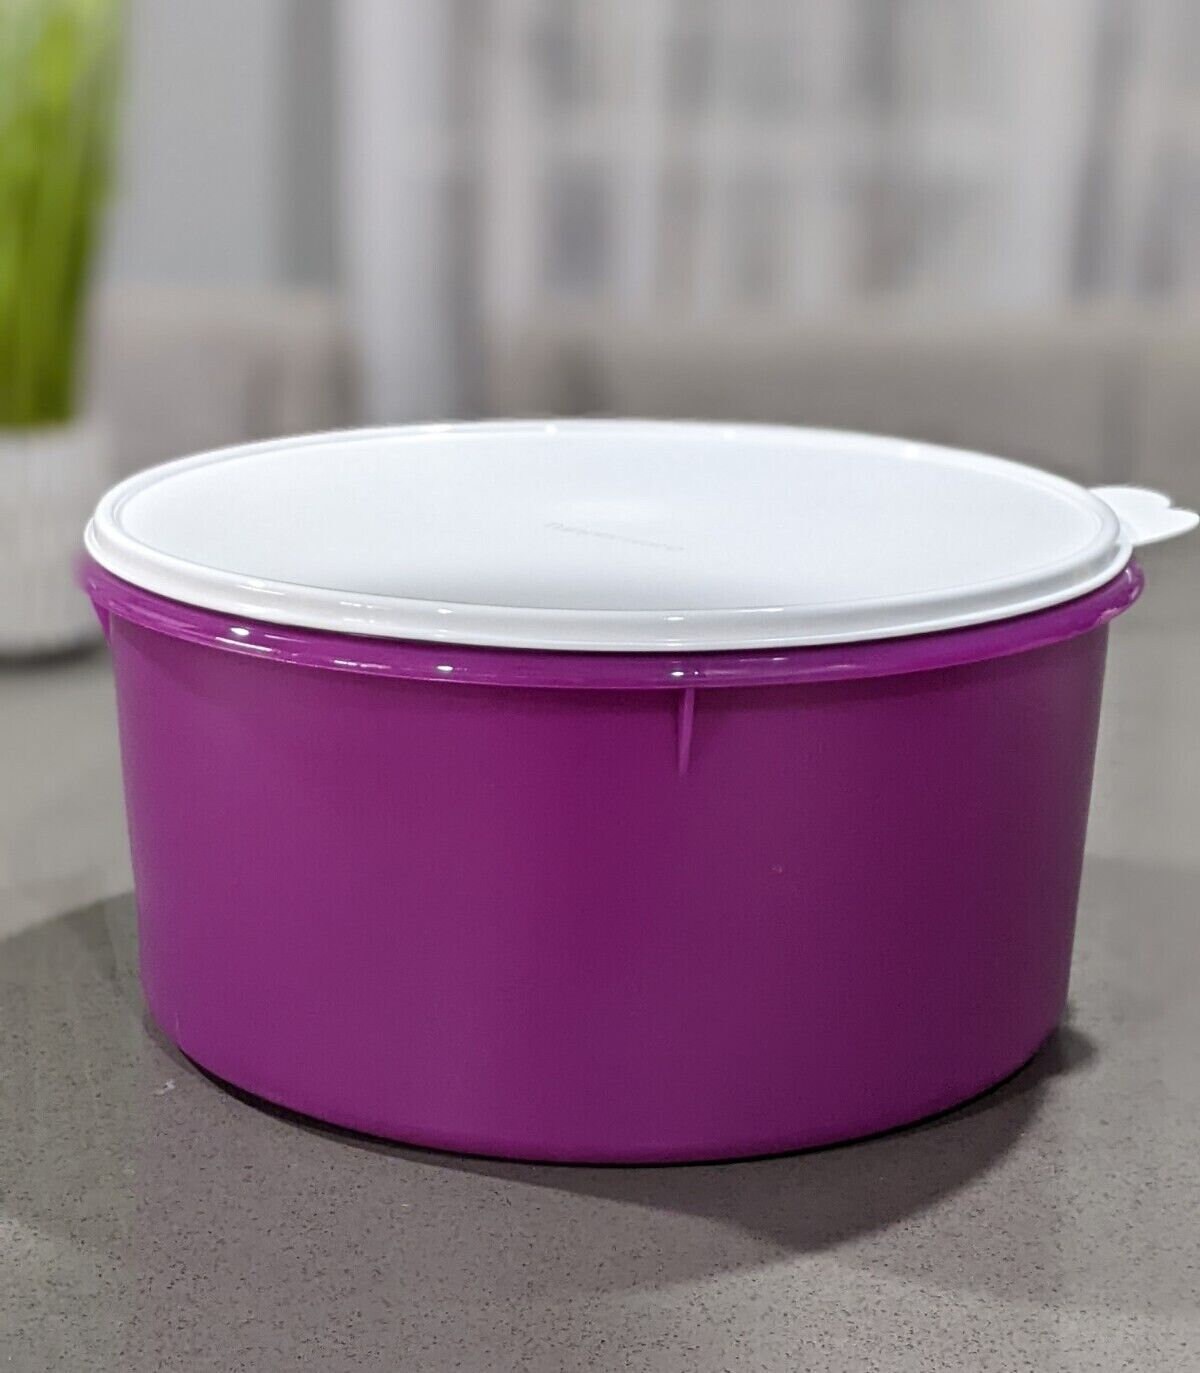 TUPPERWARE TO GO LUNCH ROUND WITH COMPARTMENTS PURPLE EEUC